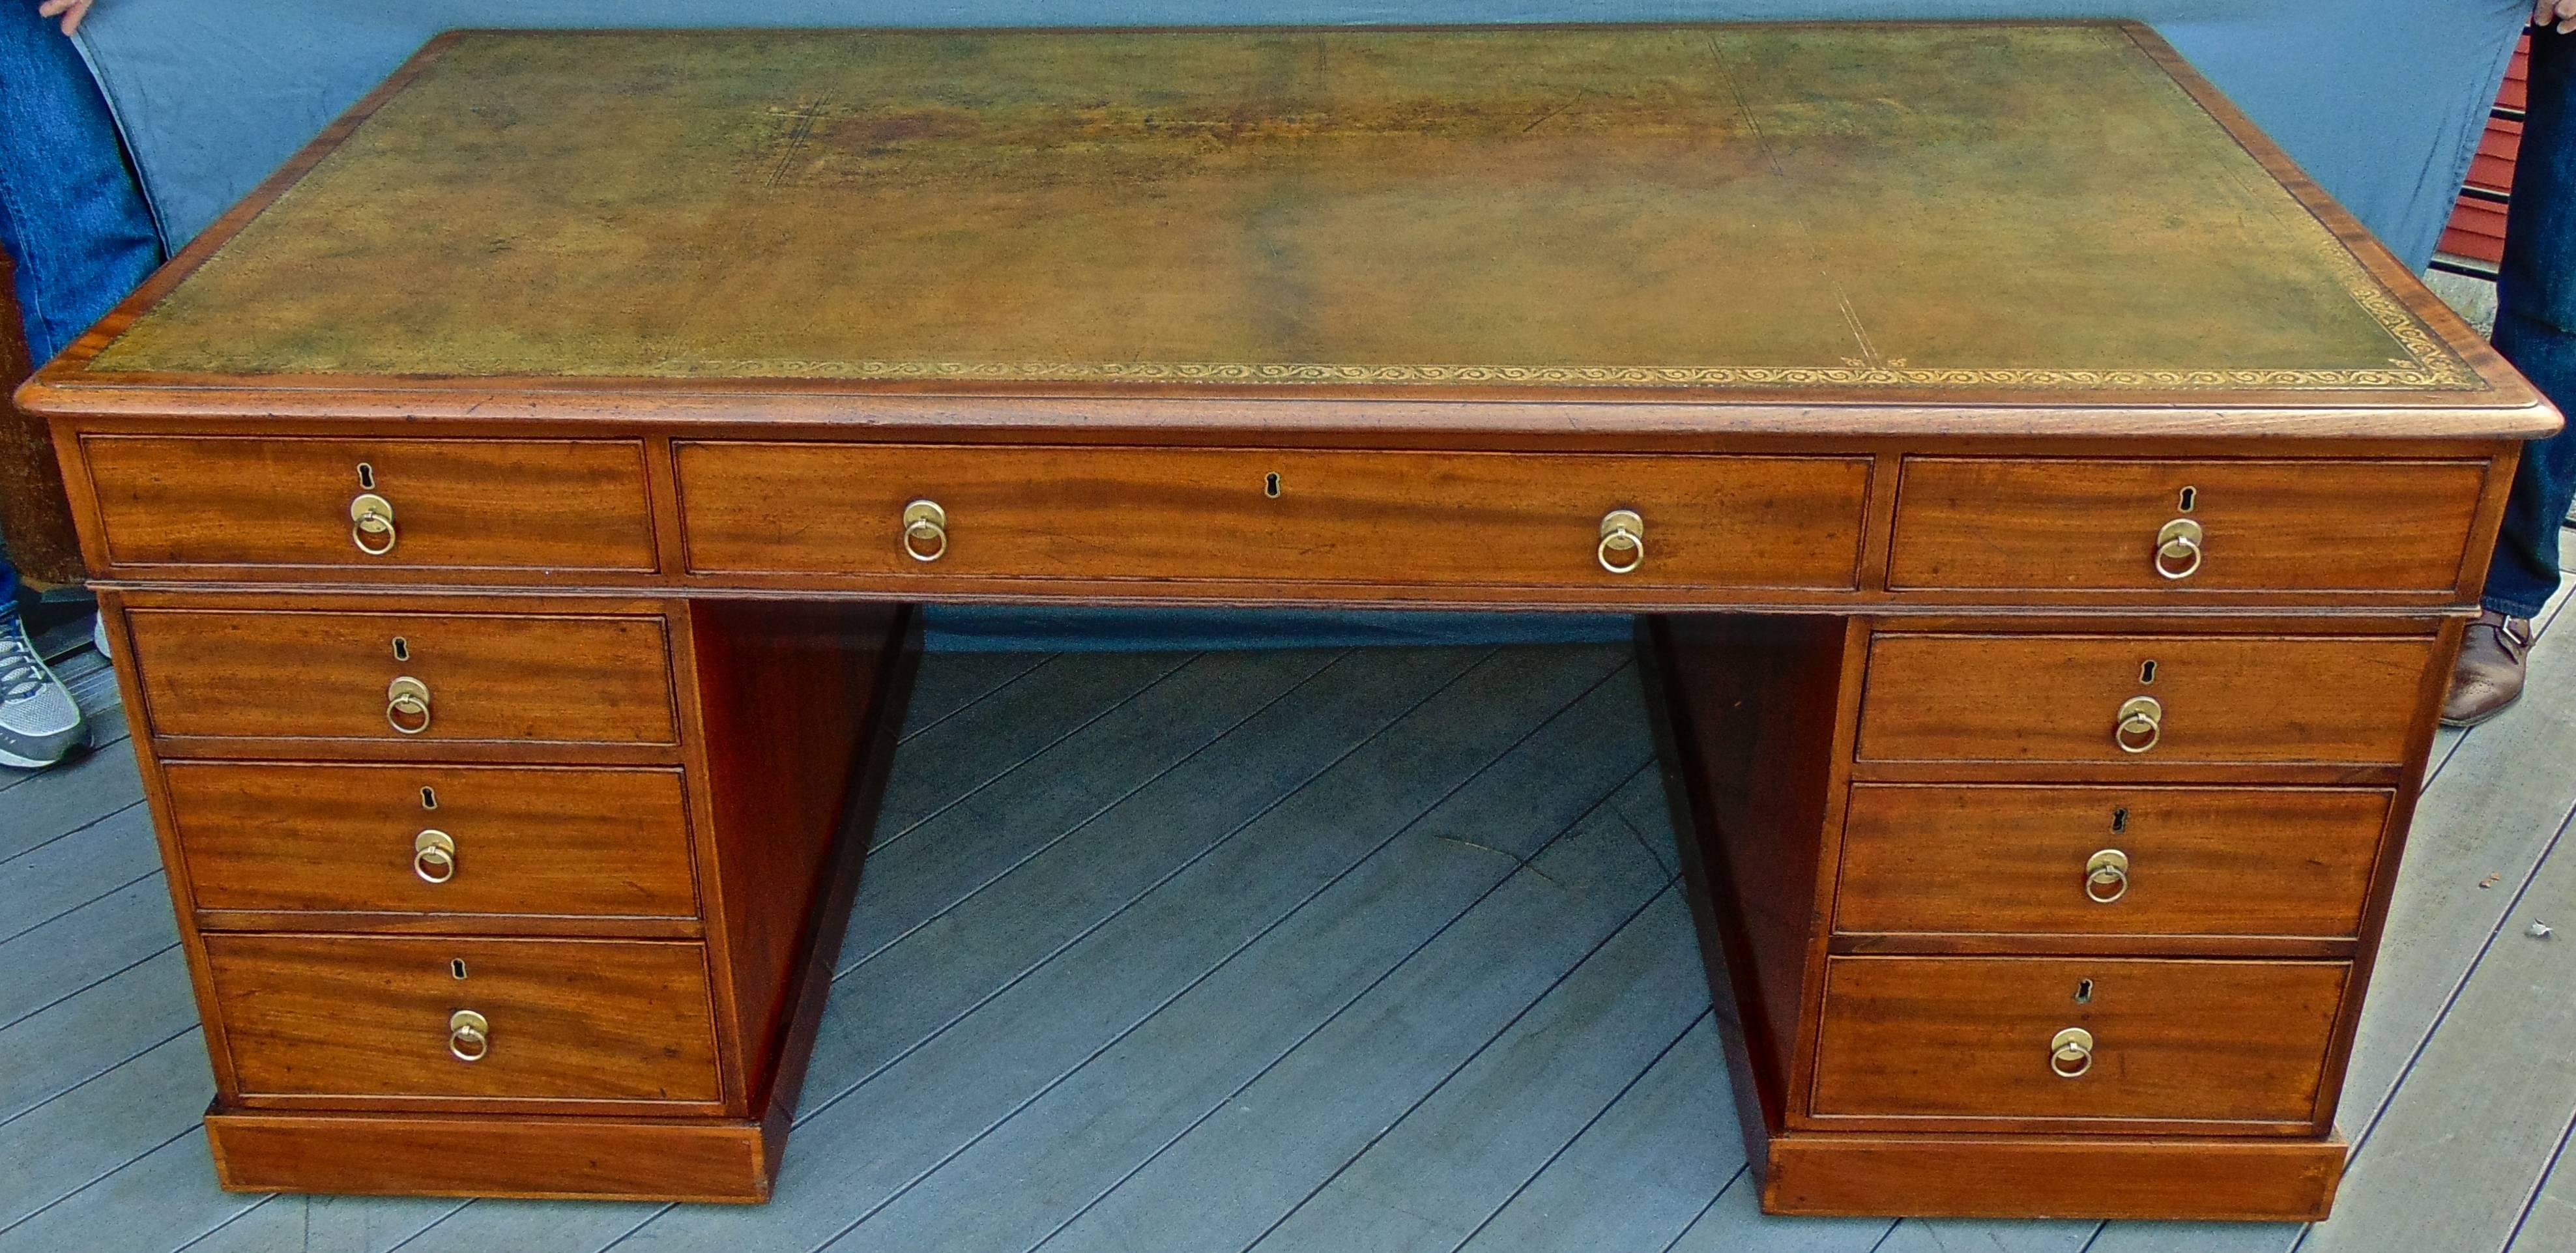 Period Georgian true partner desk.

Mahogany.
Green tooled leather top, Melli hues and patina.
Drawers on one side of base/cabinets on reverse.